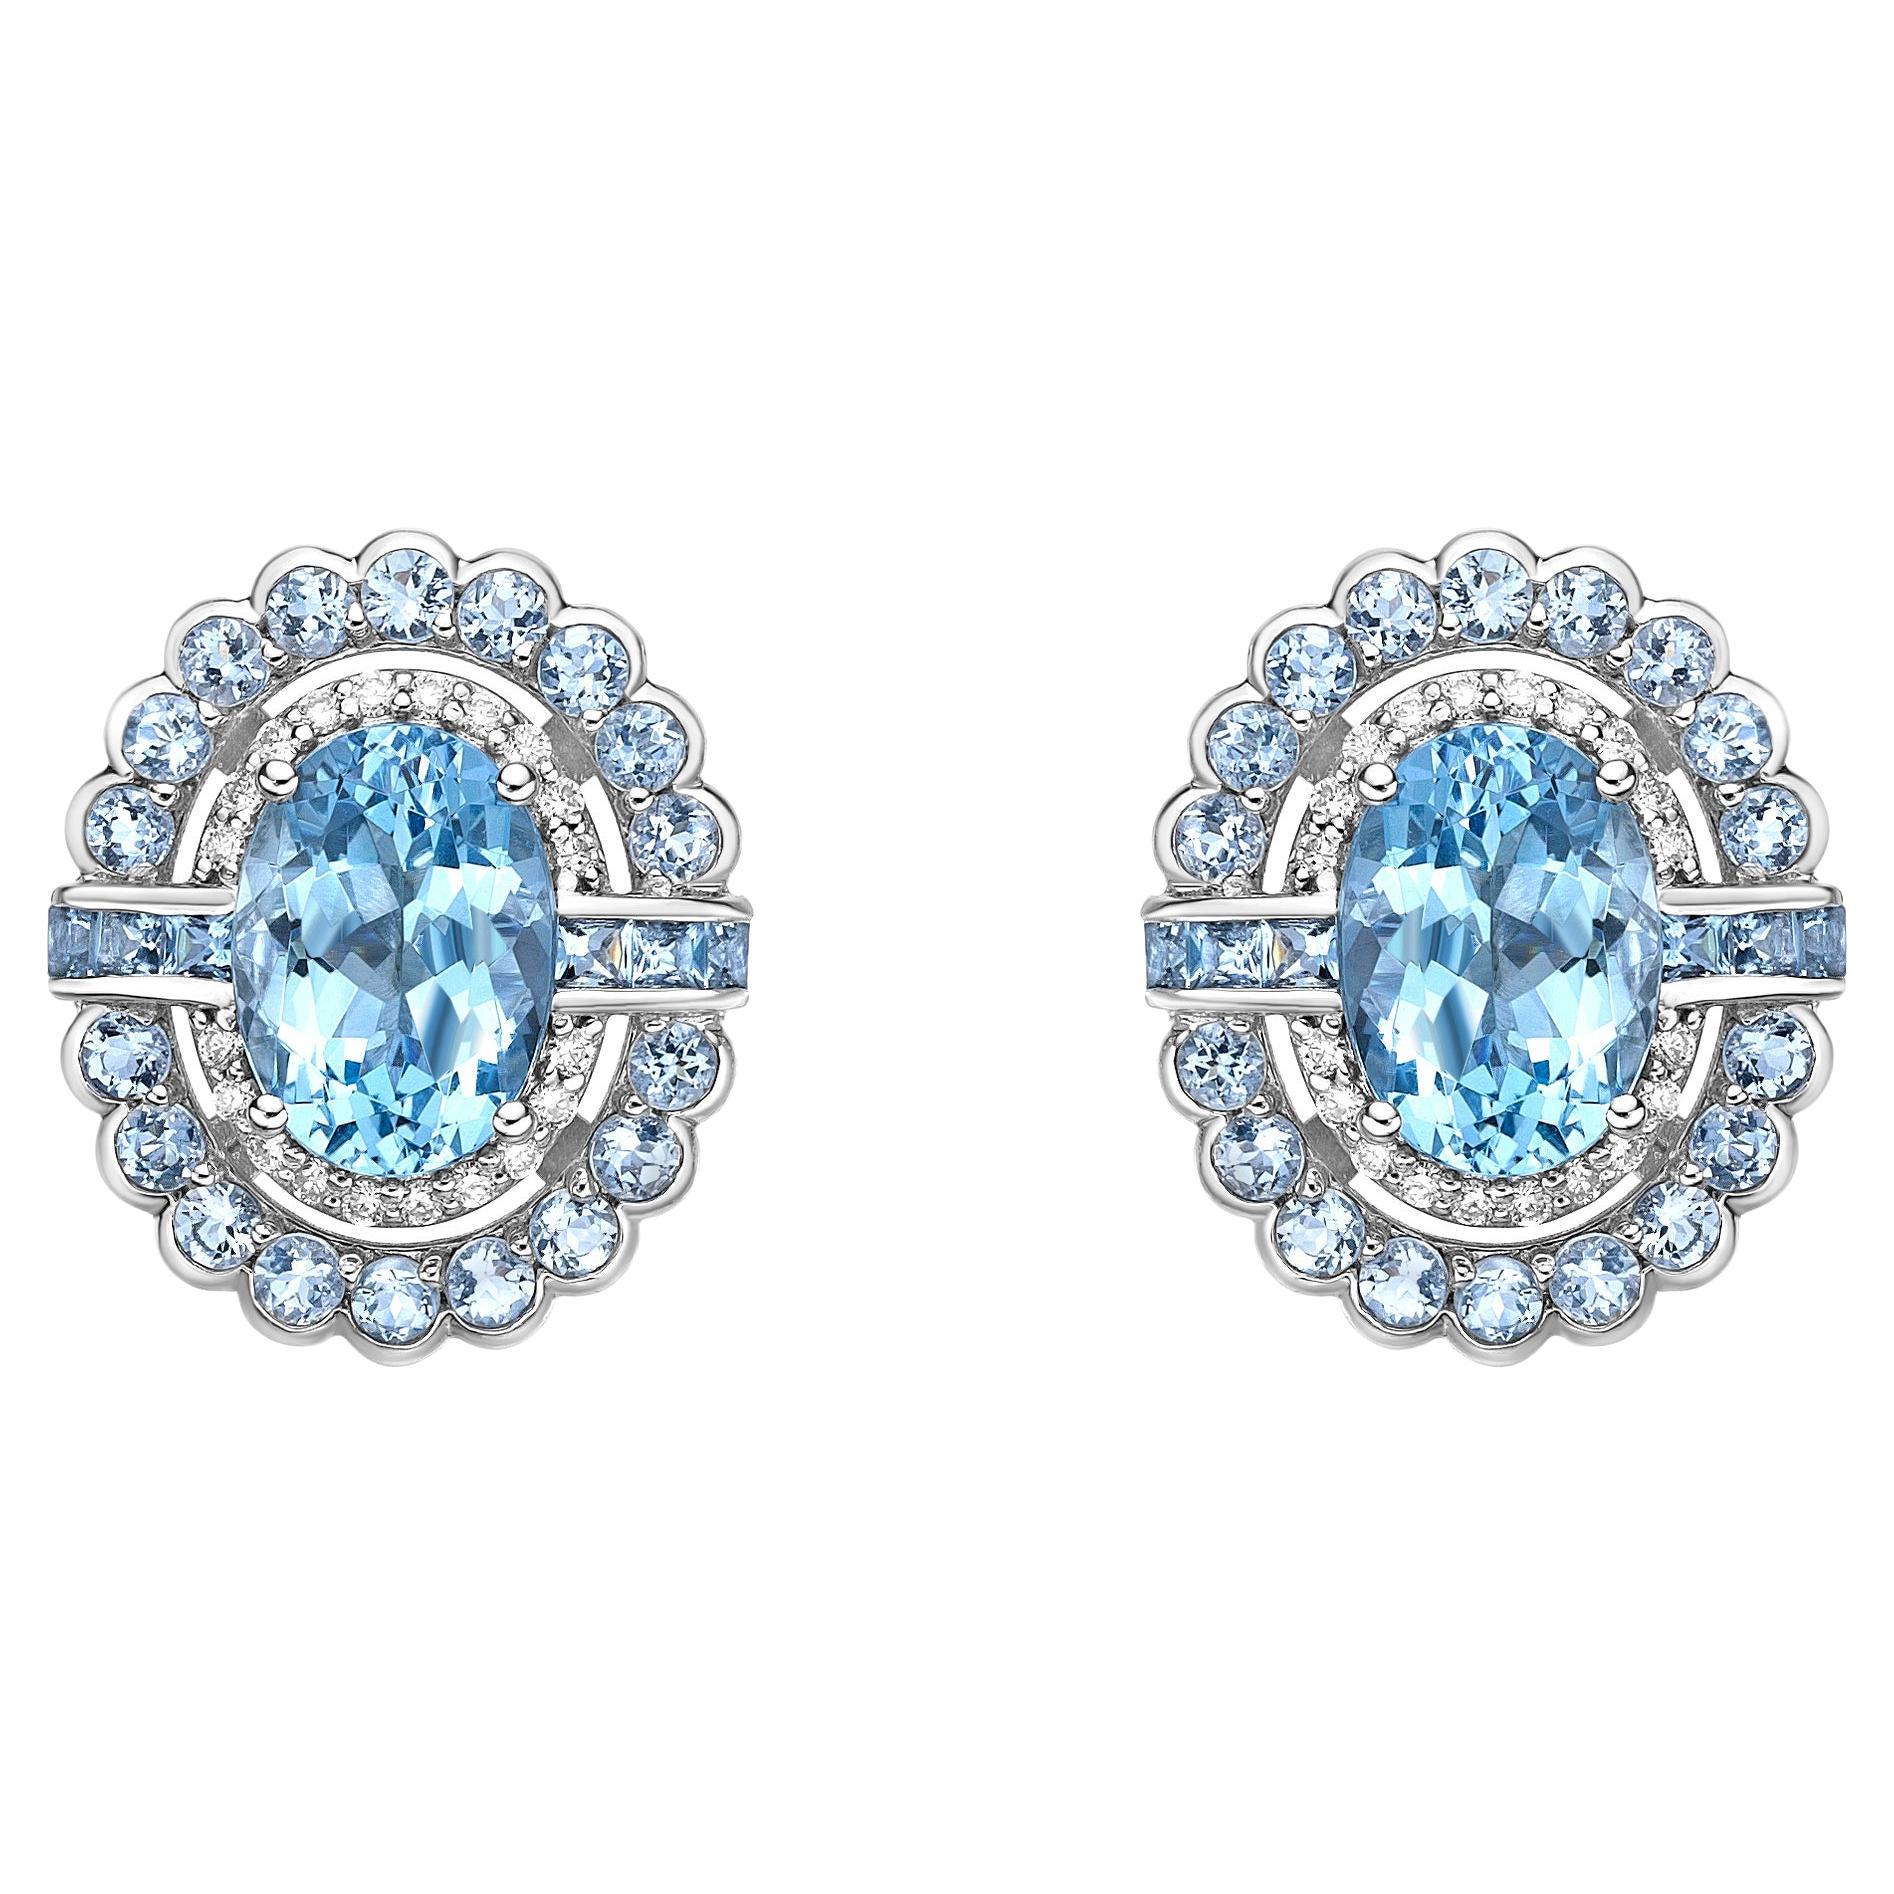 Aquamarine Stud Earring with Diamond in 18 Karat White Gold. For Sale